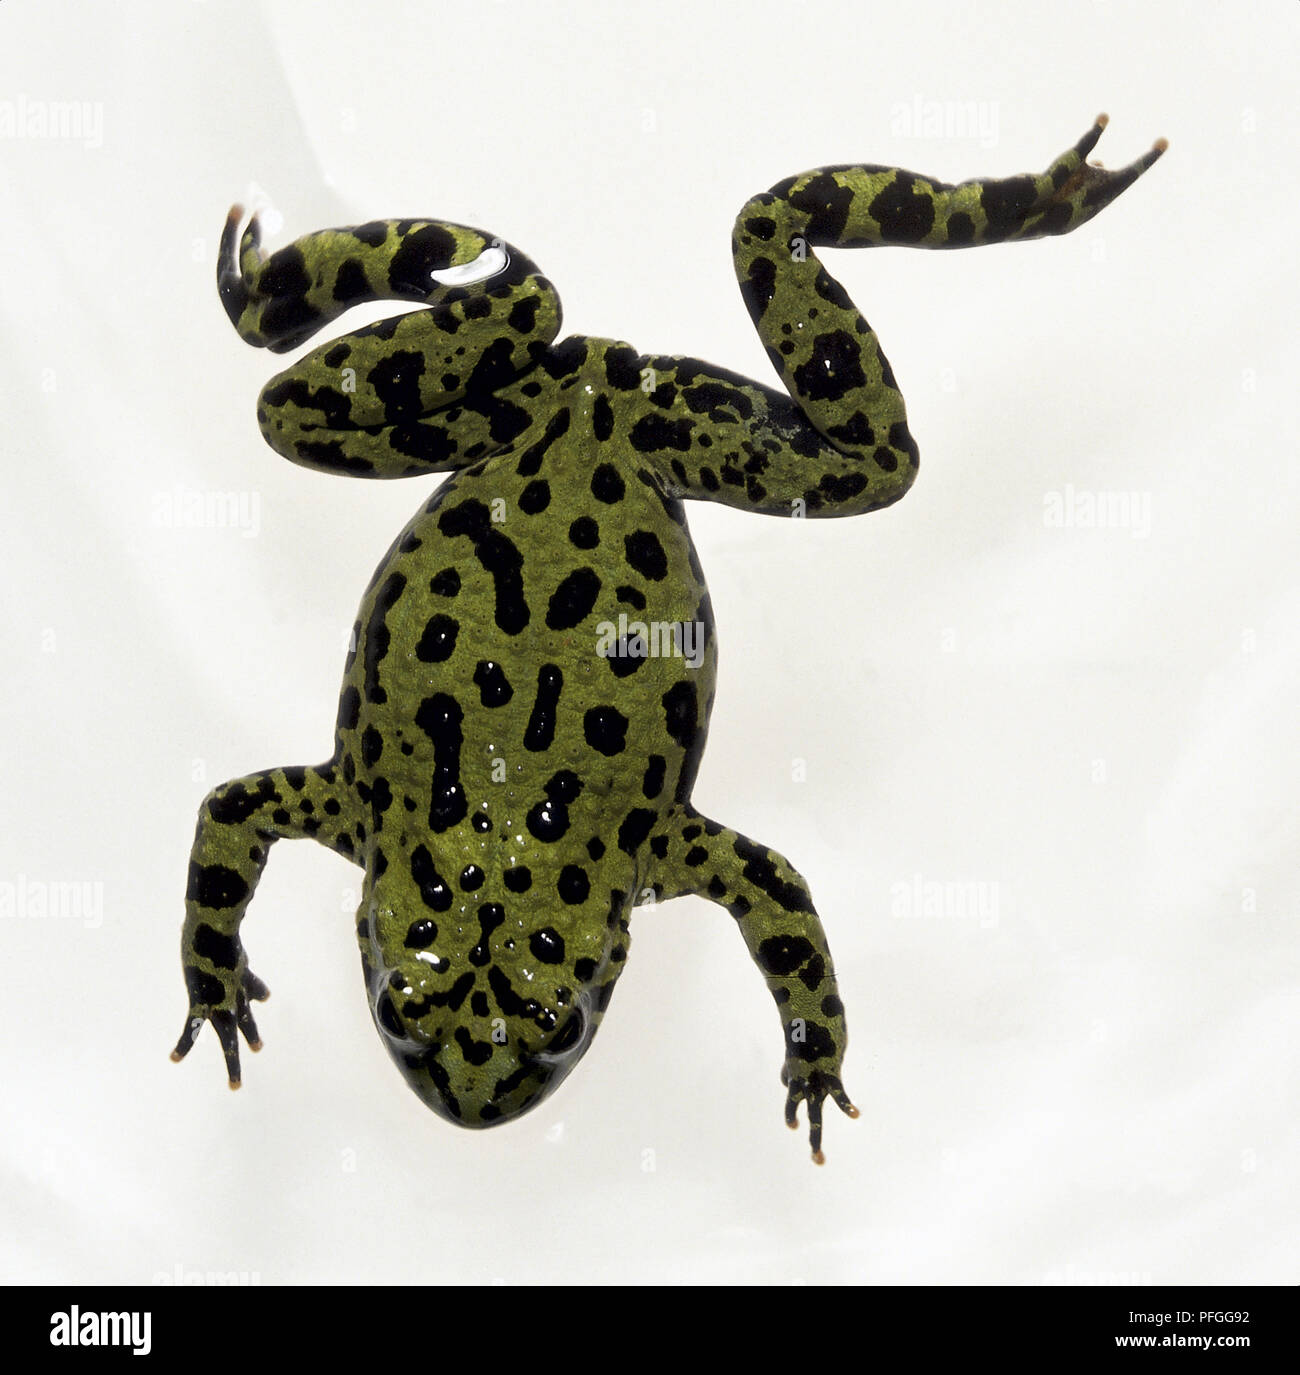 Overhead view of the Oriental Fire-bellied toad, with black spot markings and splayed legs Stock Photo